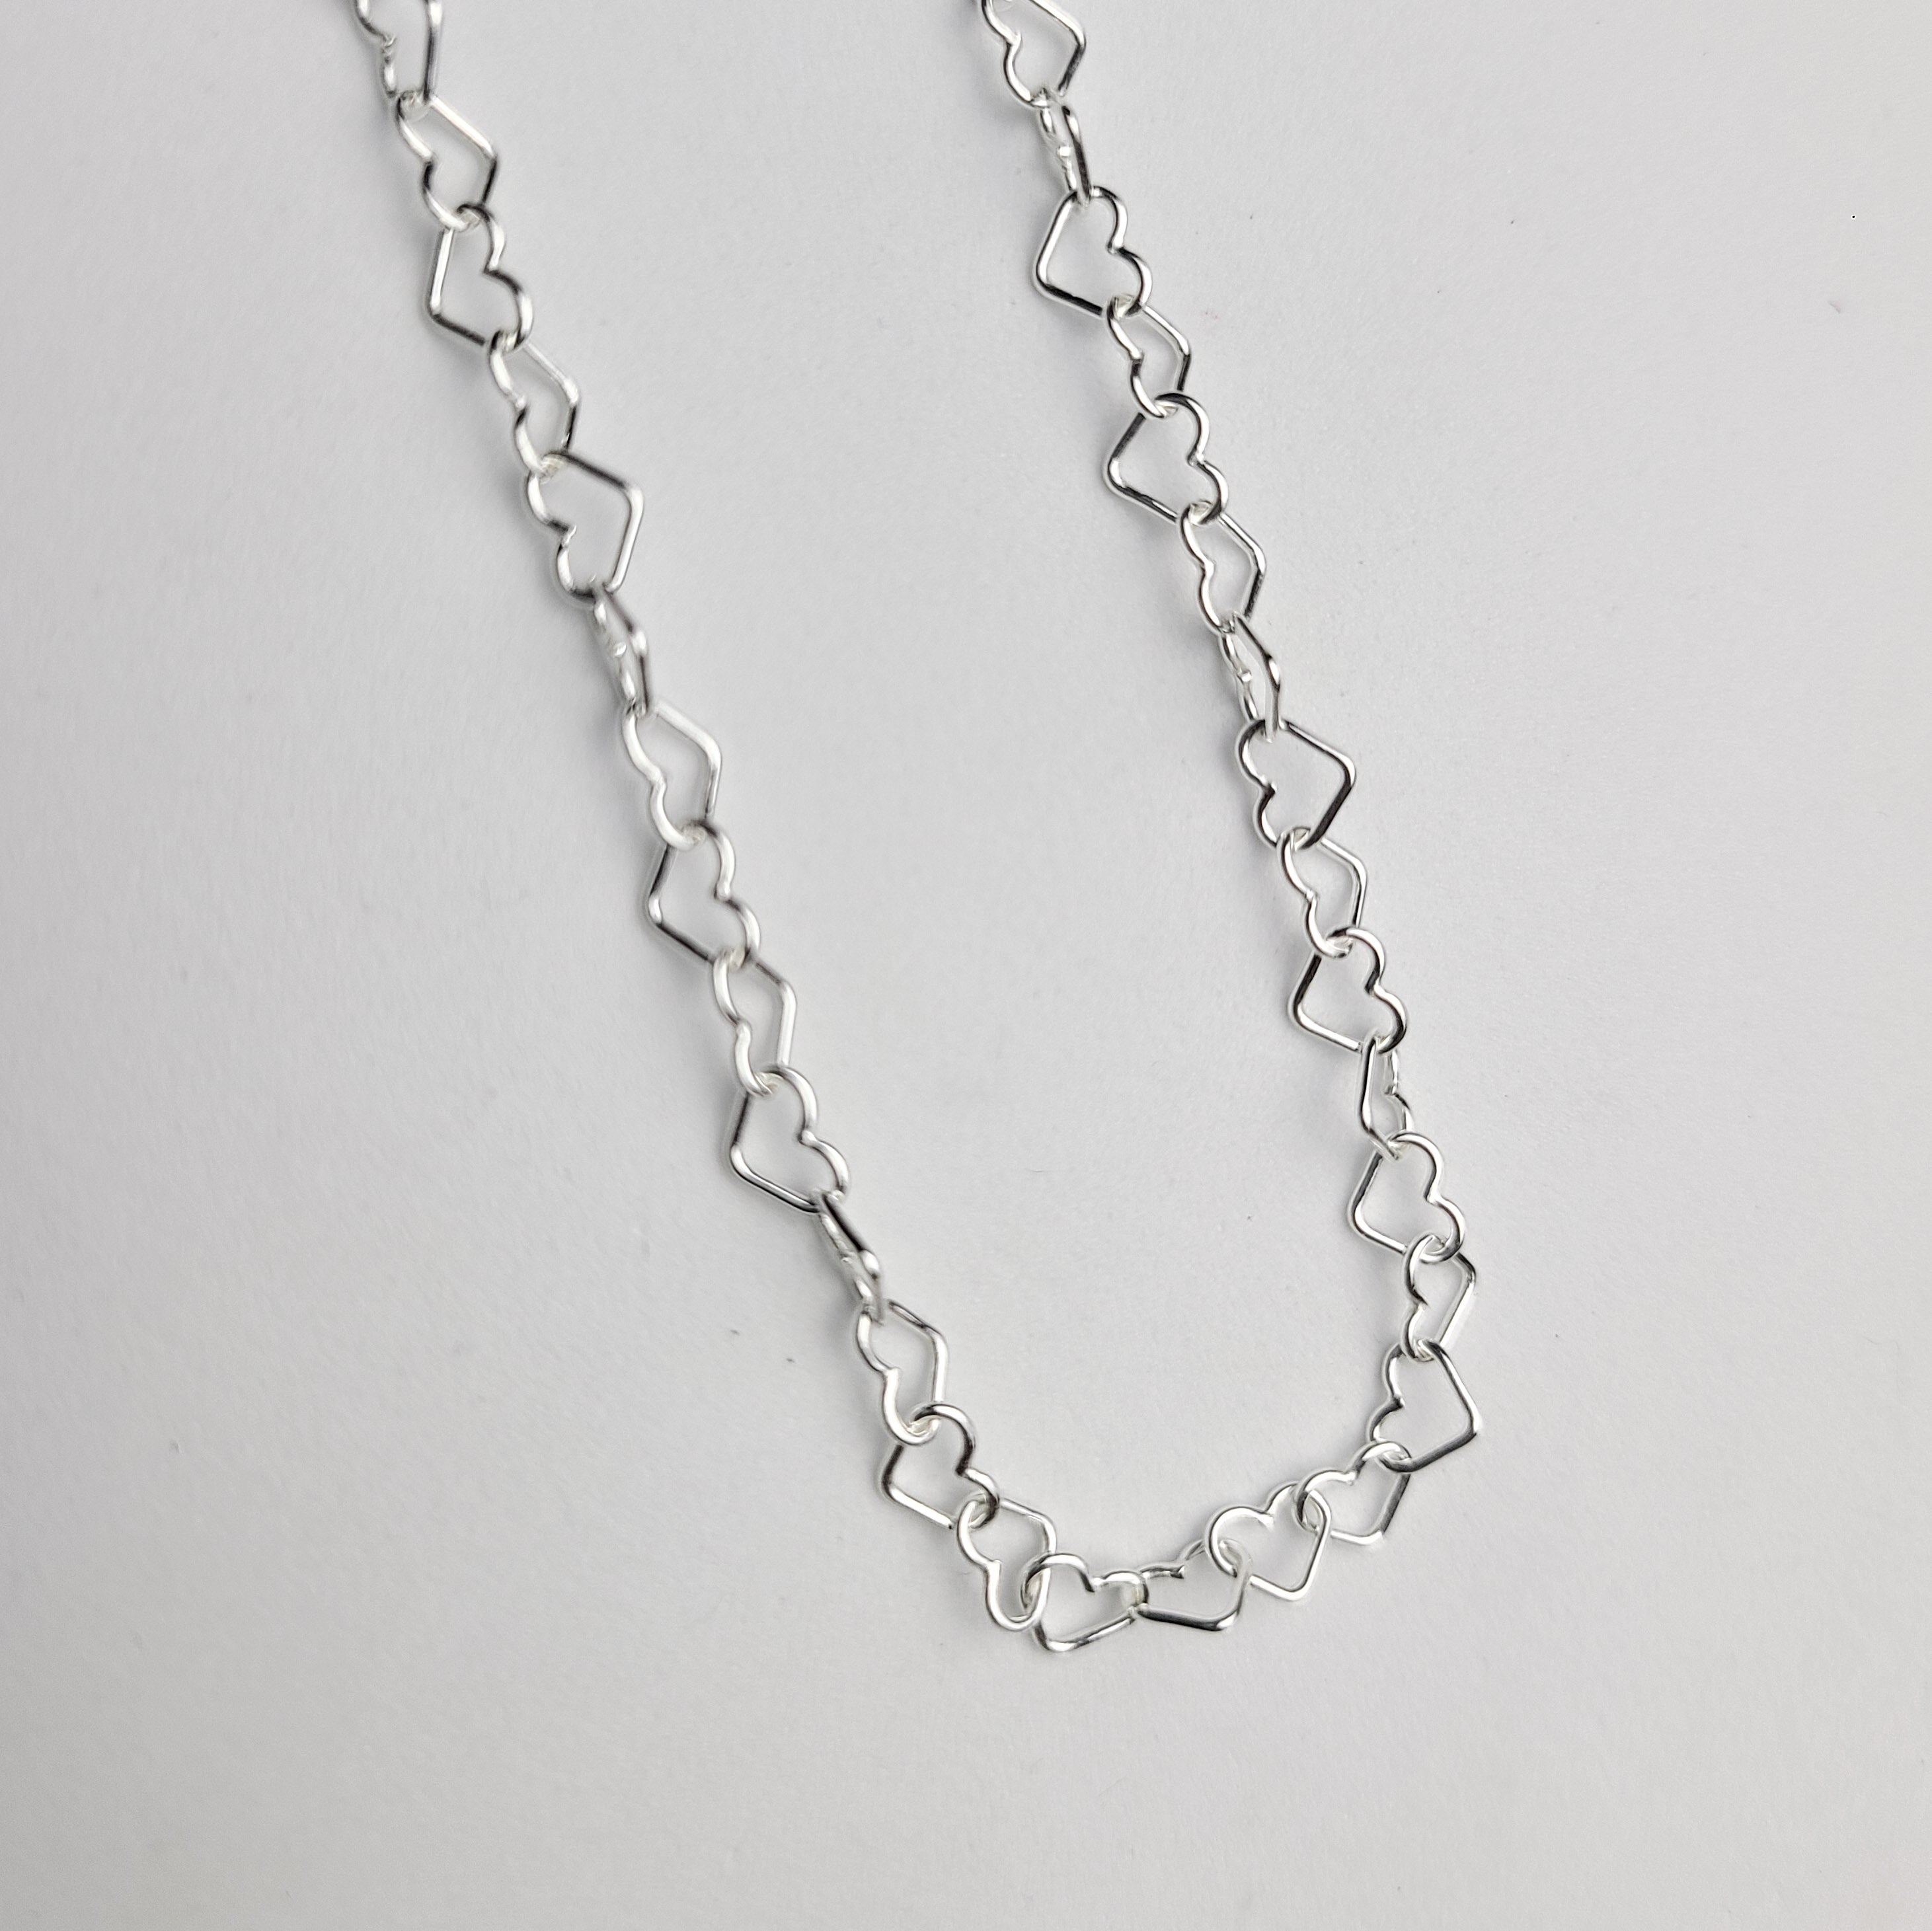 Tiny Heart Chain, Sterling Silver Heart Necklace